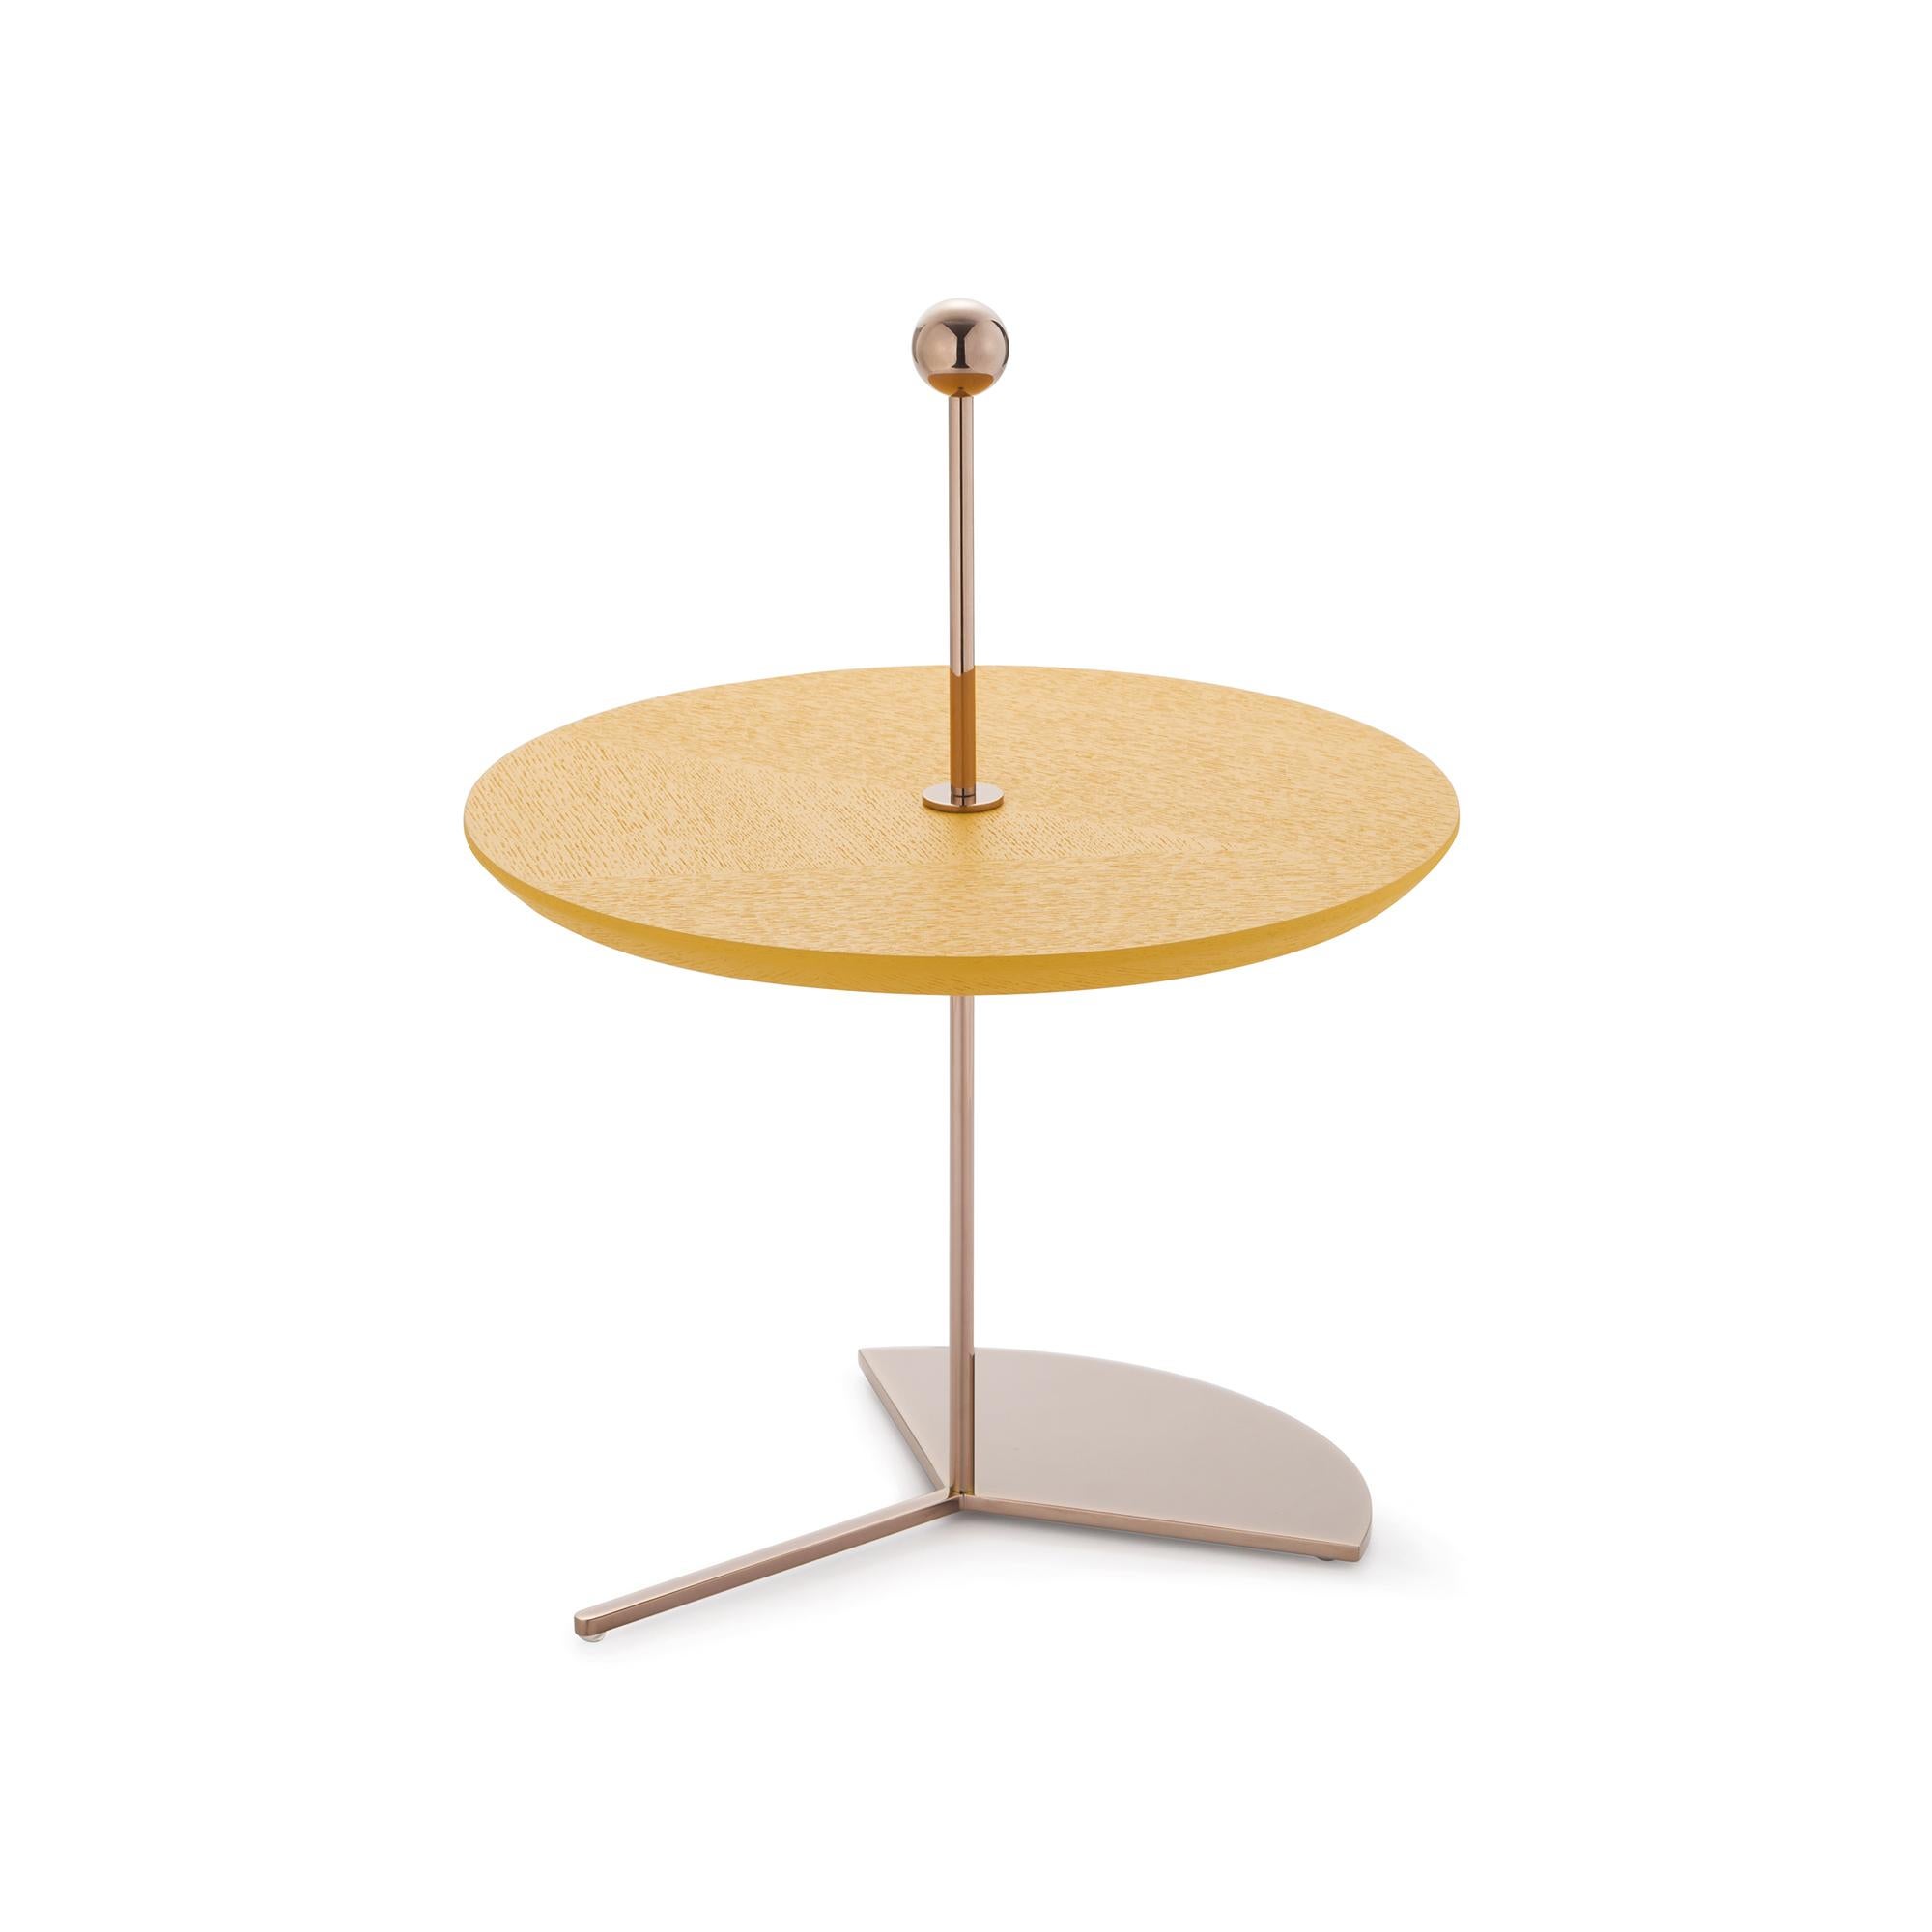 Off The Moon N°2 cake stand by Thomas Dariel
Dimensions: Diameter 30 x height 37.6 cm 
Materials: Tray in natural color ash veneer base and handle in plated metal coated.
Also available in colors: Pink, green, and yellow, and in other